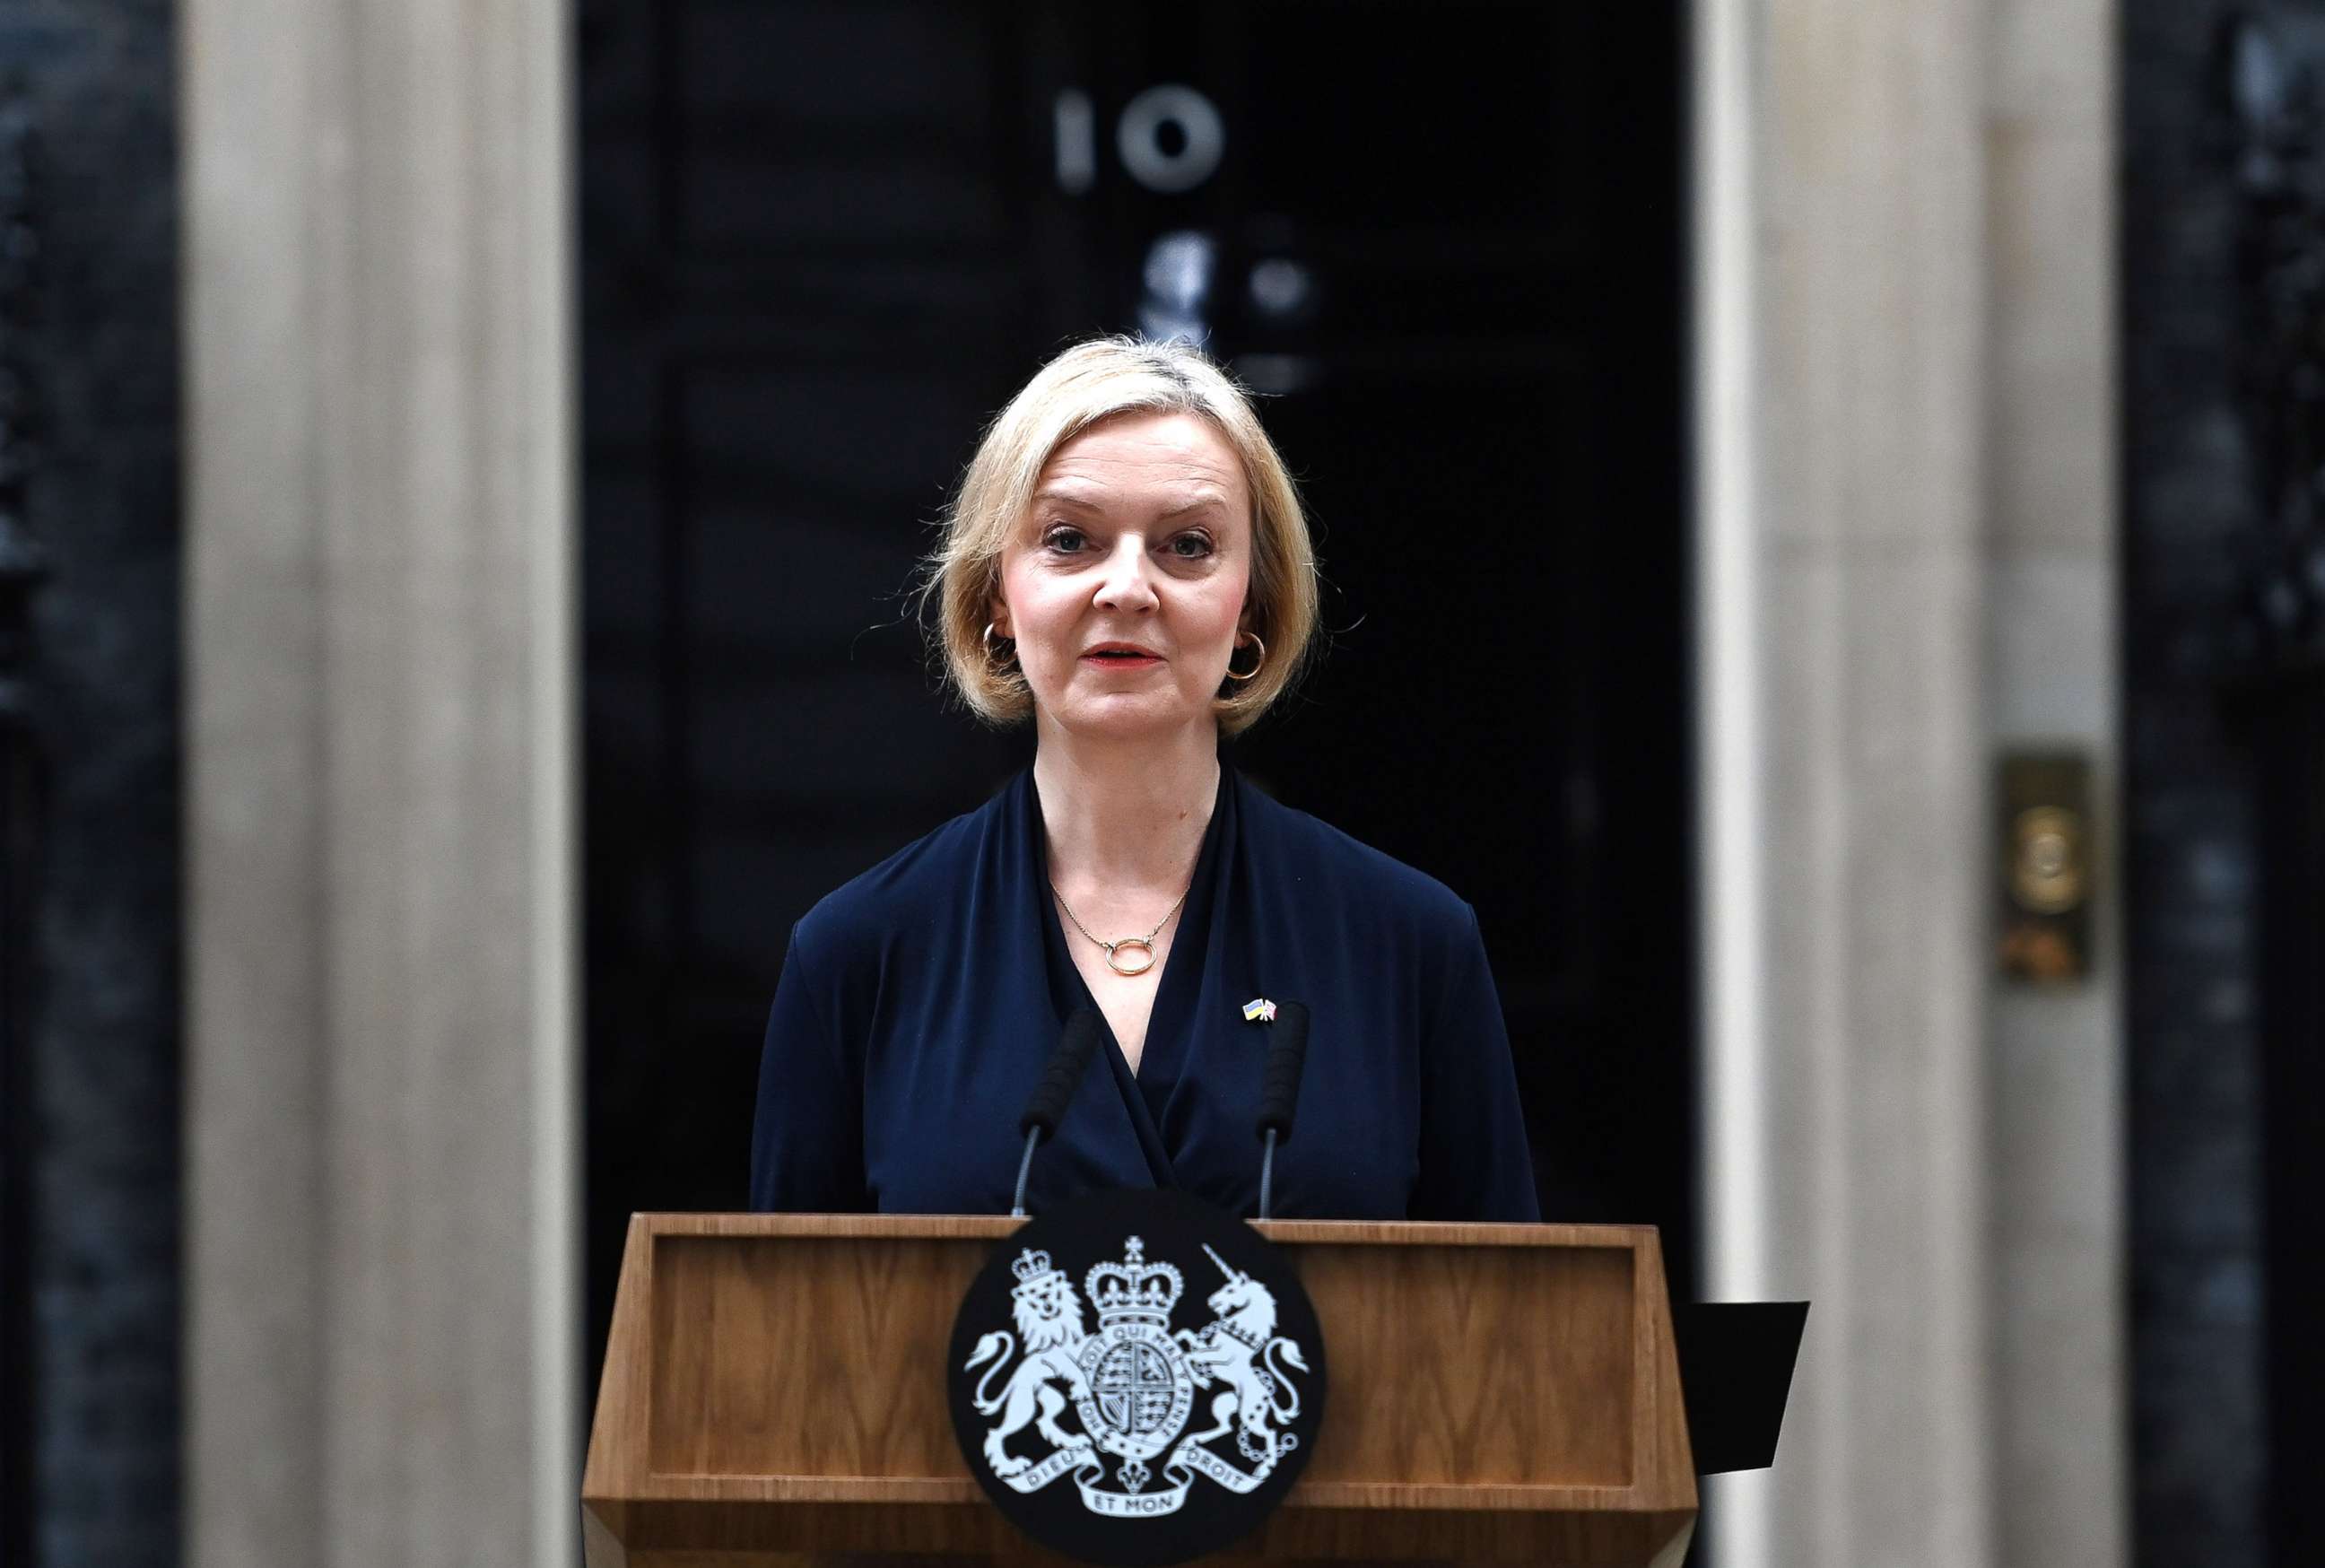 PHOTO: Prime Minister Liz Truss announces her resignation at 10 Downing Street on Oct. 20, 2022 in London.